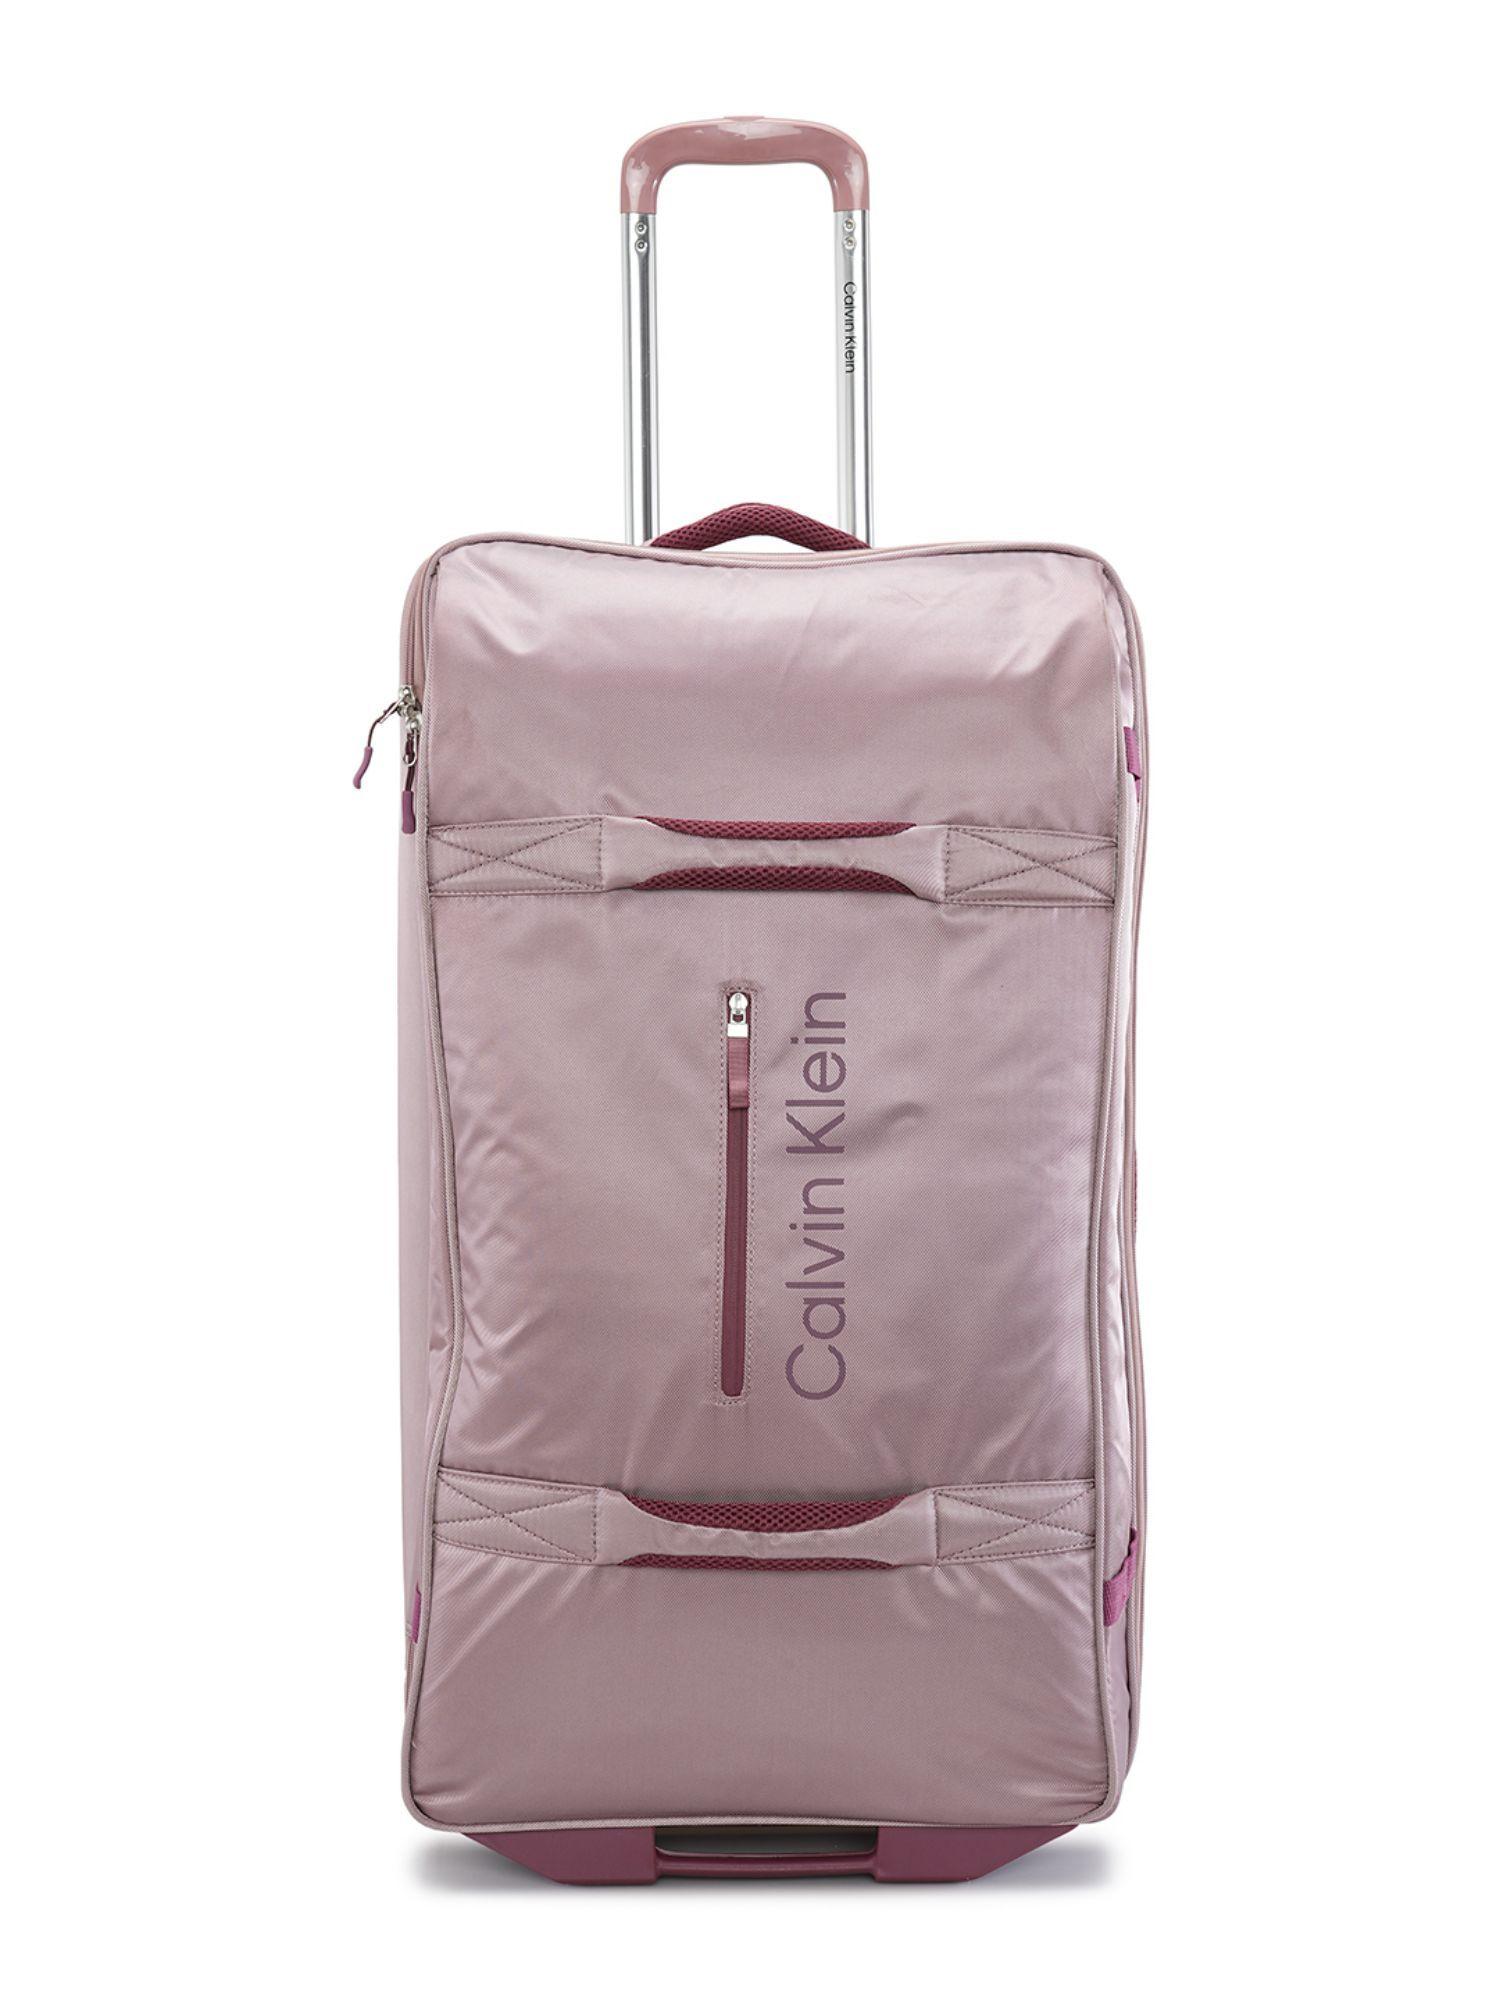 rockaway rose 900d polyester material soft 21 duffle trolley